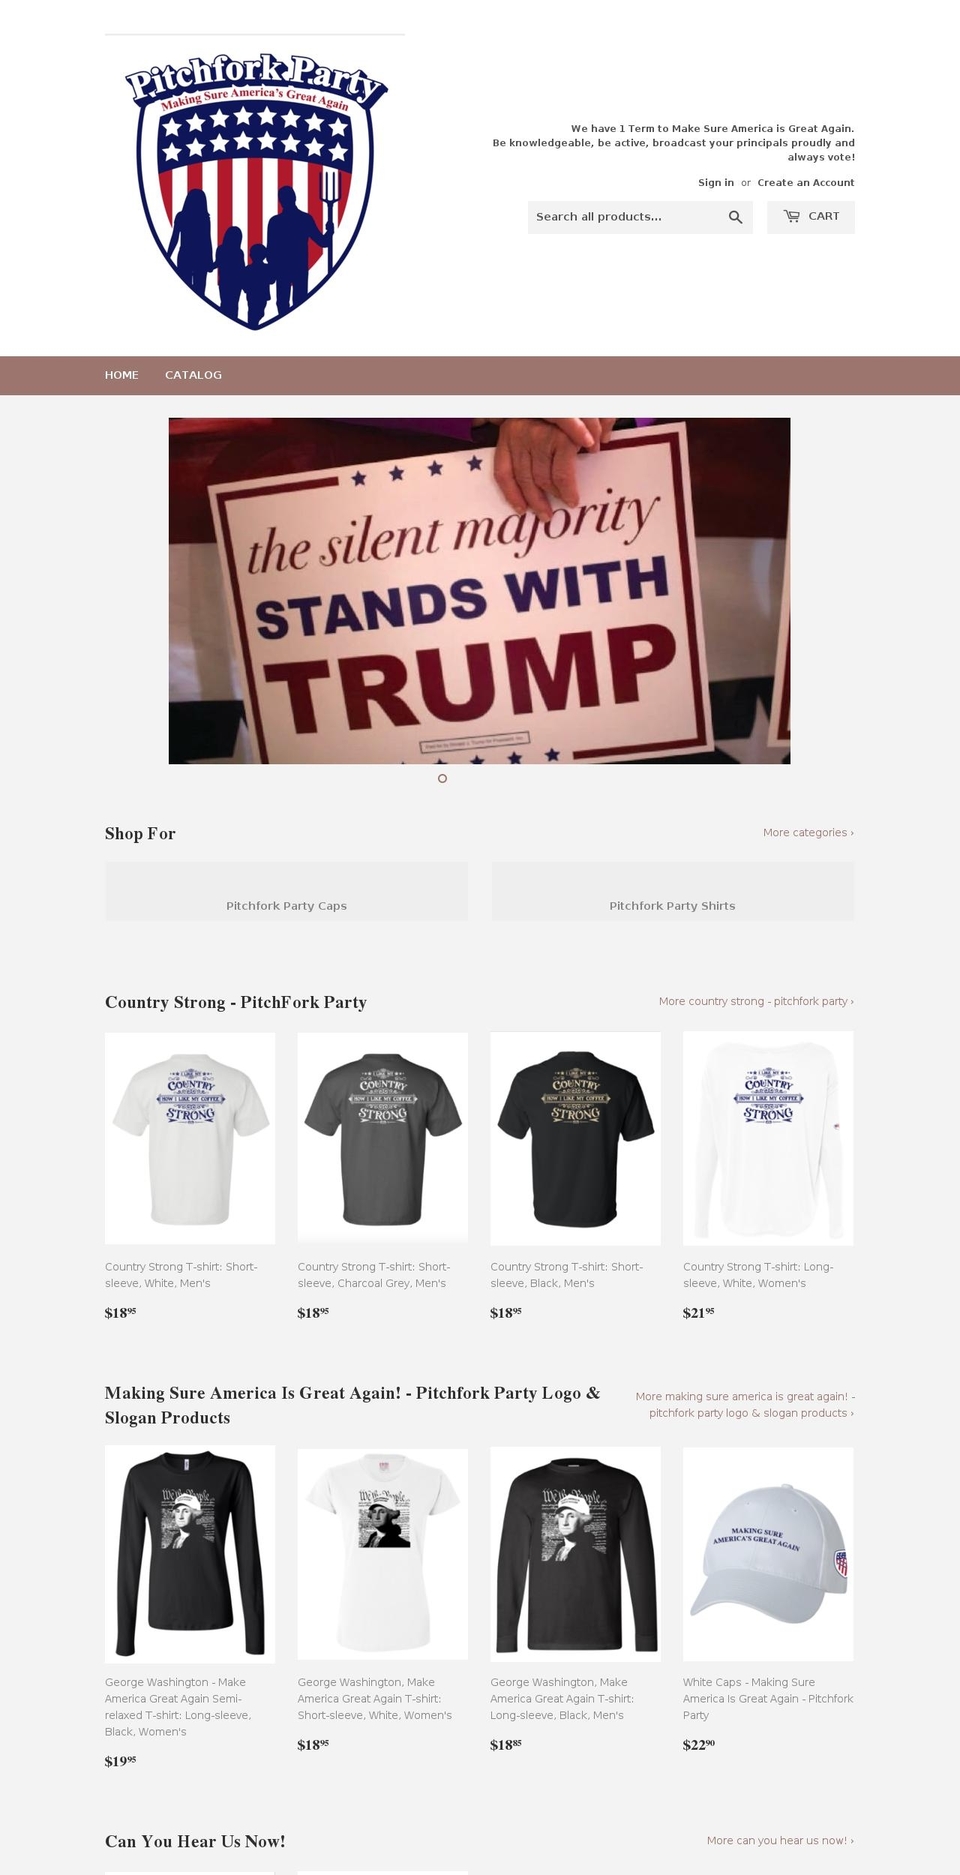 Making Sure America Is Great Again! Shopify theme site example pitchforkparty.com